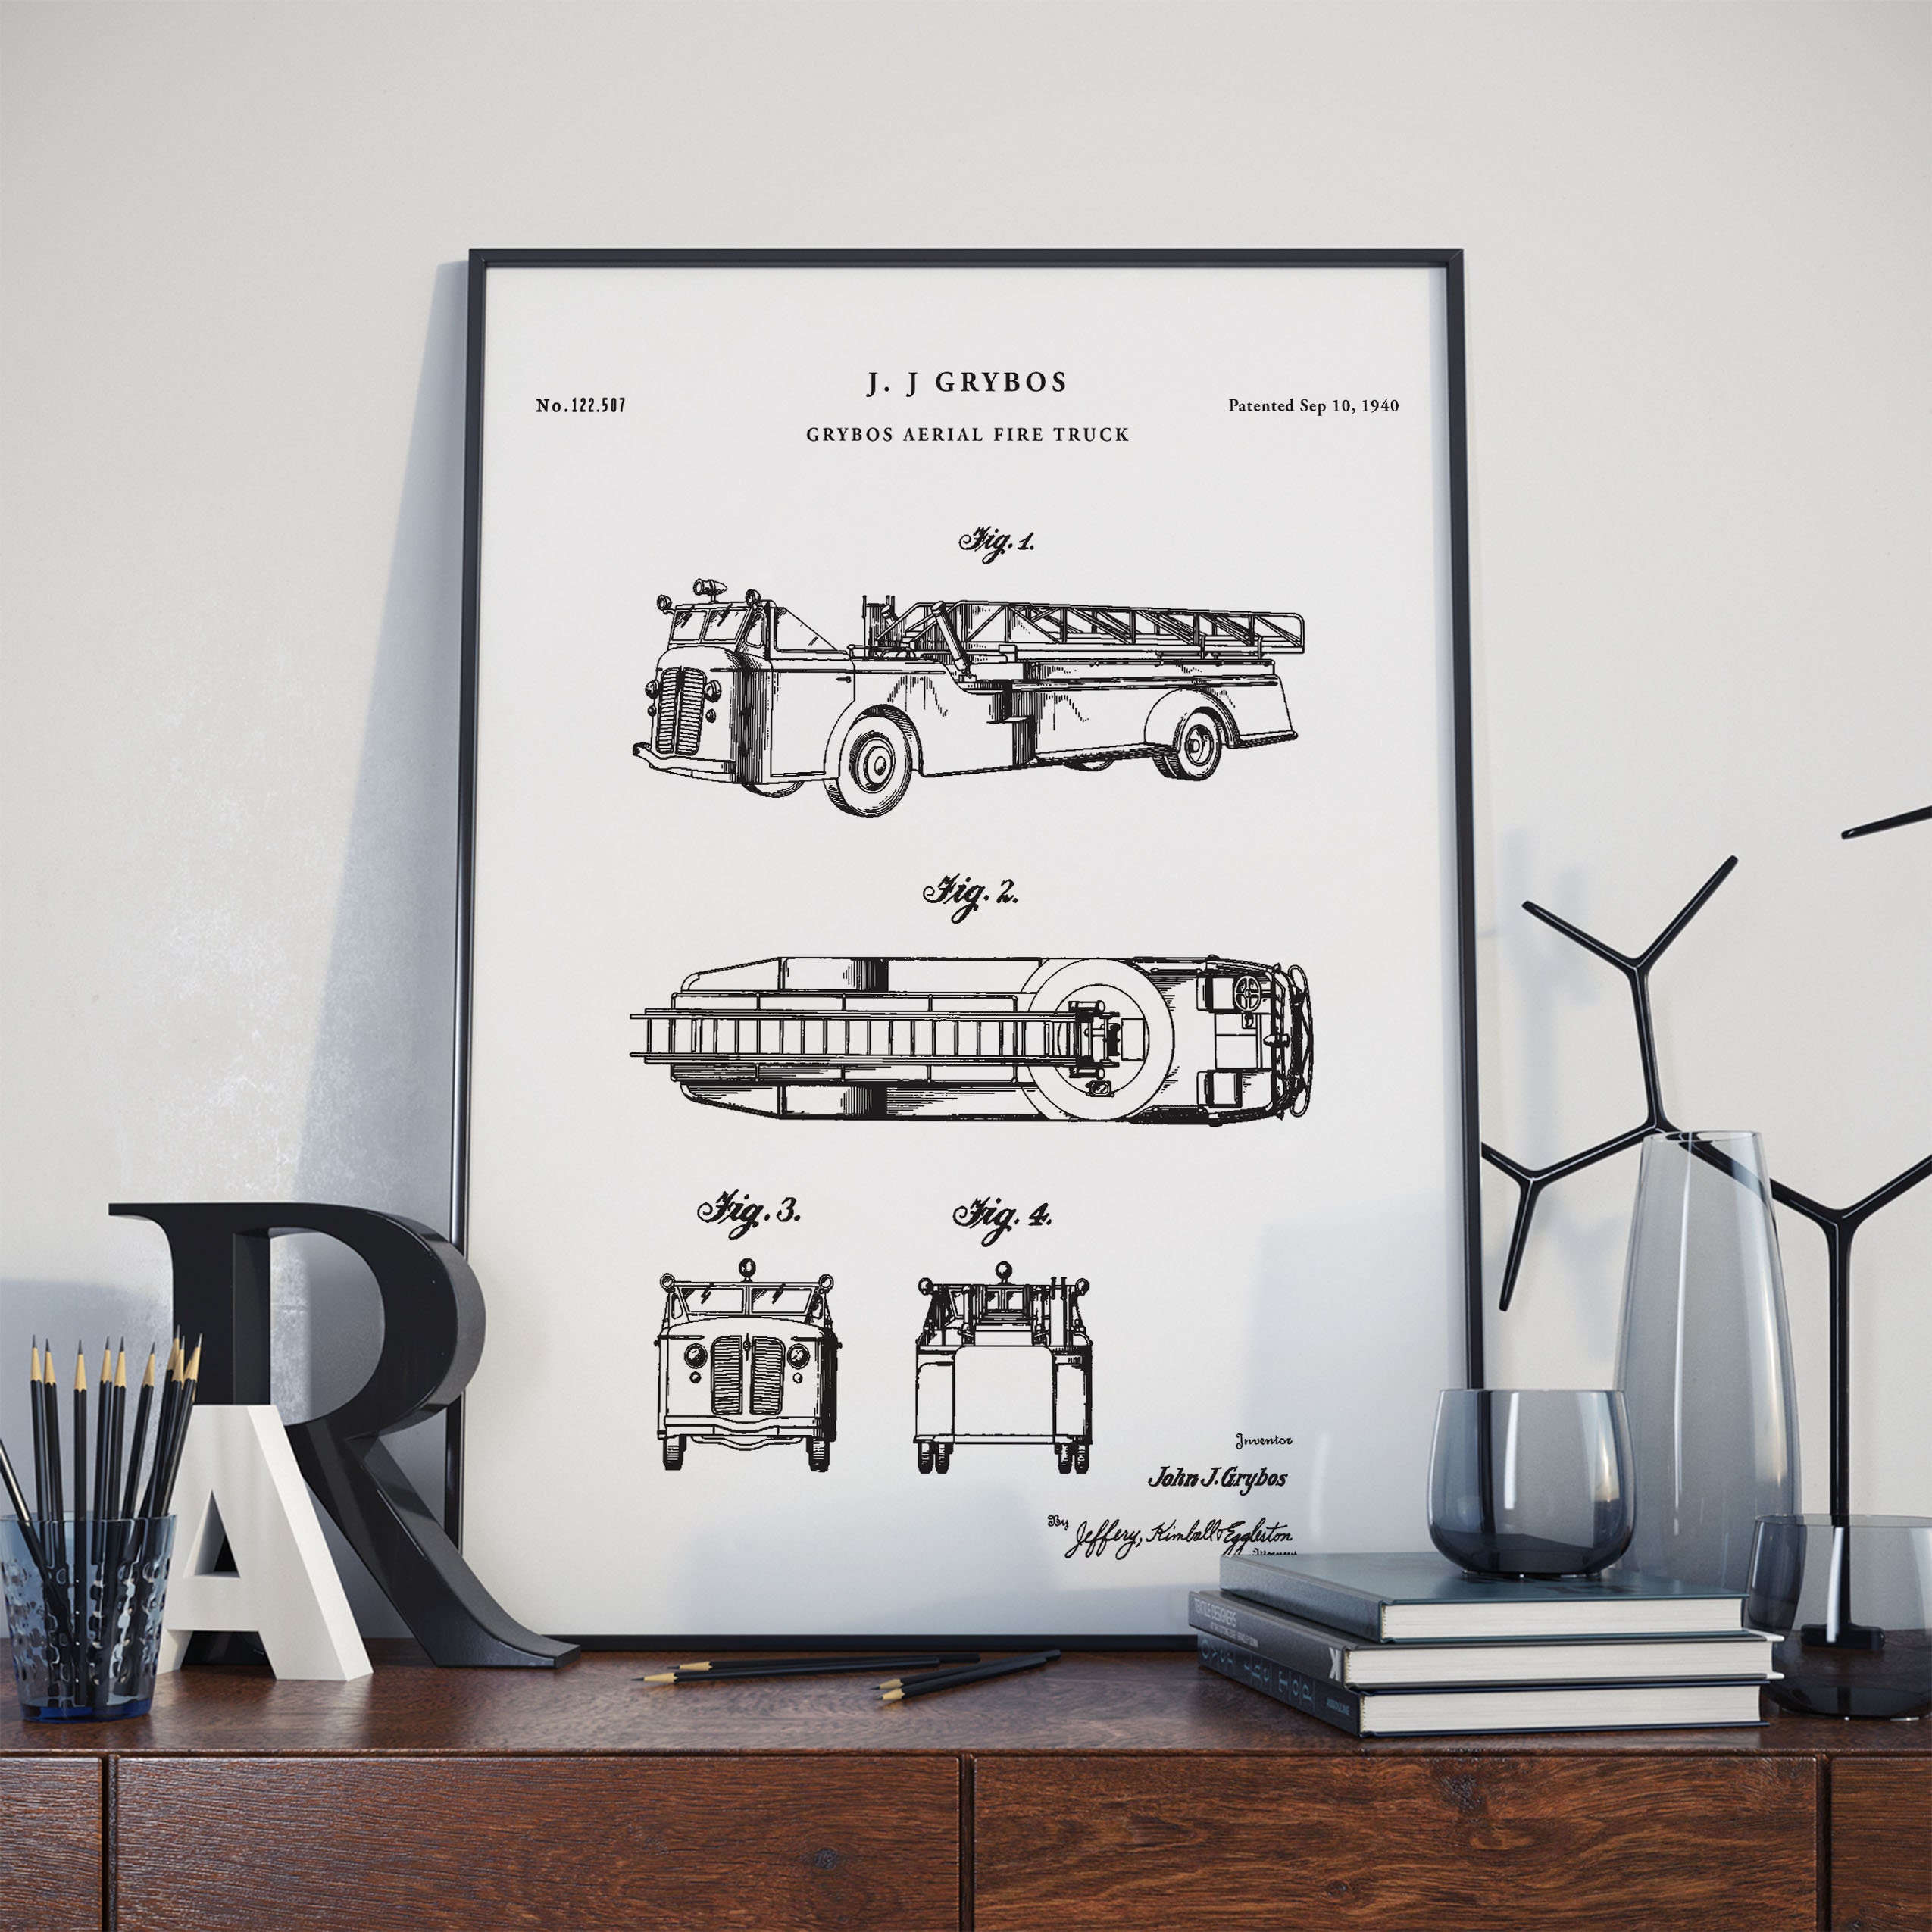 Discover Aerial Fire Truck Patent Print- 1940, Poster Wall art Illustration Print Art Home Decor Gift Vintage Patent, firefighter gift, PH246 #m